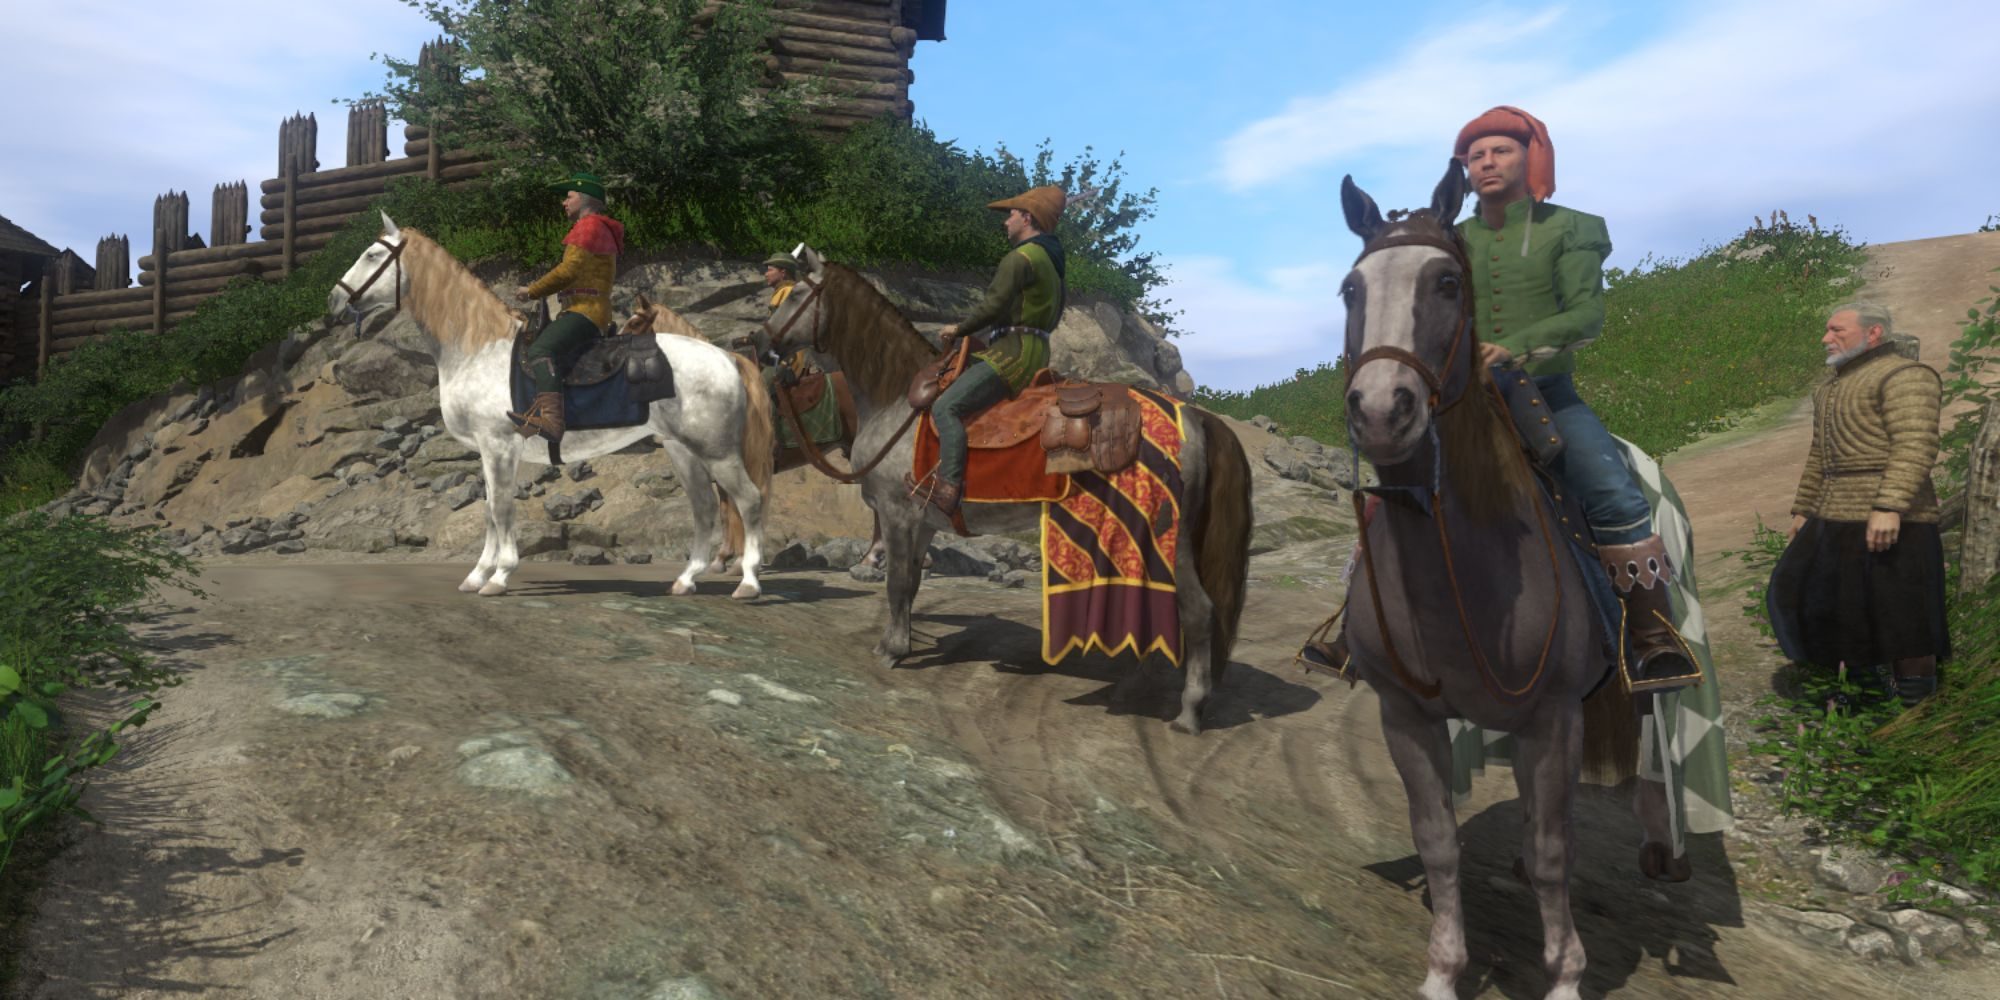 gingharian_come_deliverance_multiple_people_riding_horses-4418204